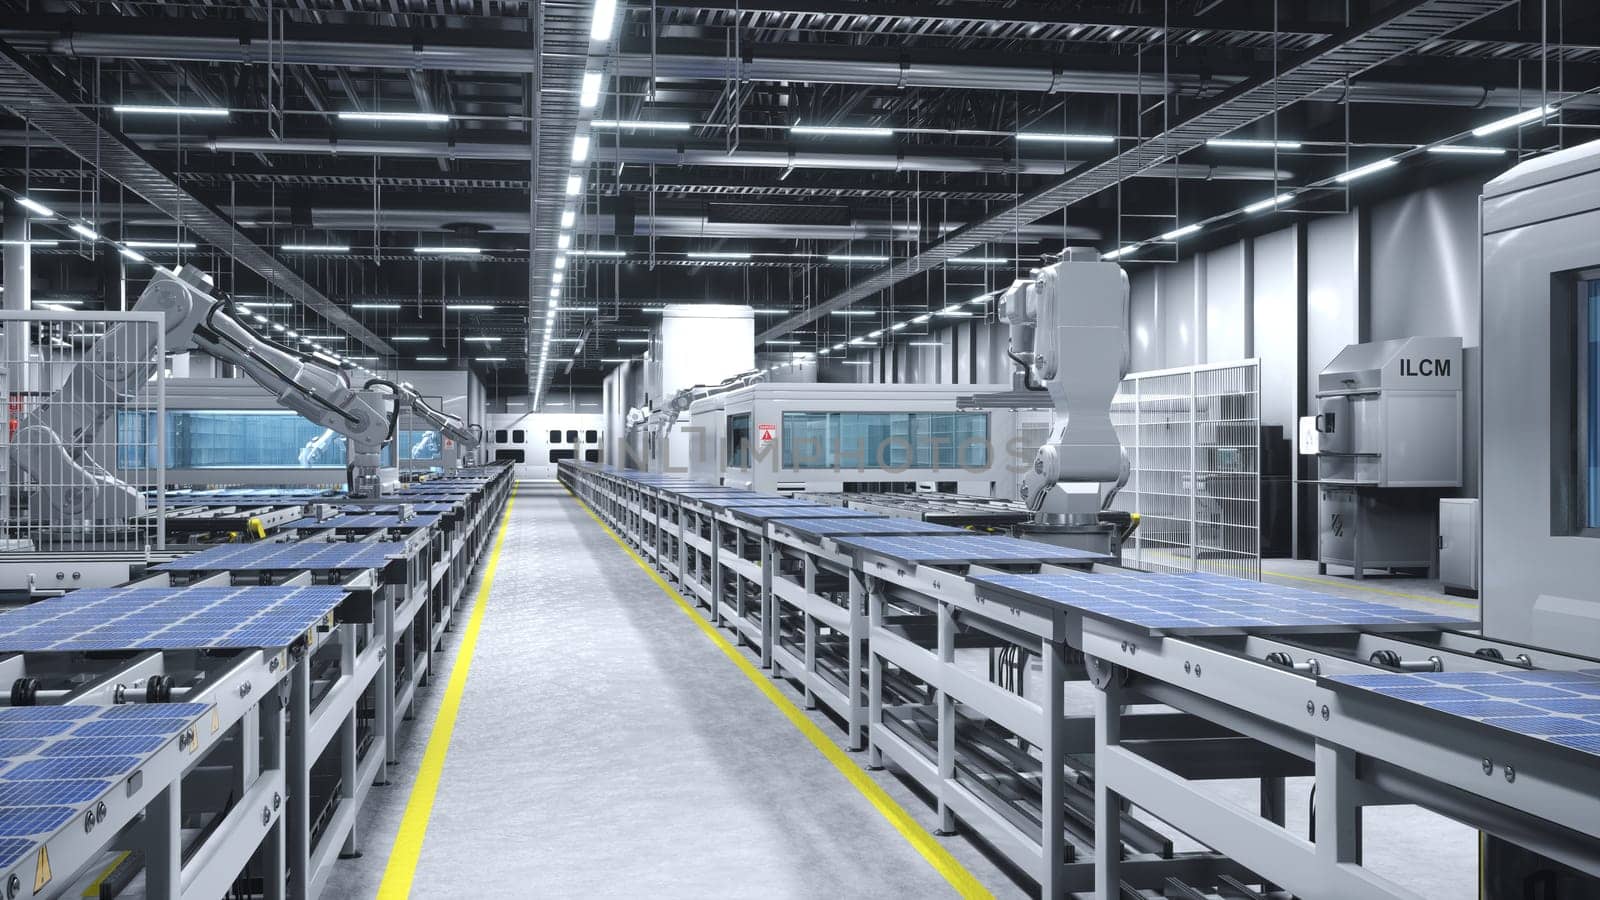 Industrial robot arms placing solar panels on large production line in modern clean factory. Photovoltaics being assembled on conveyor belts inside manufacturing warehouse, 3D render